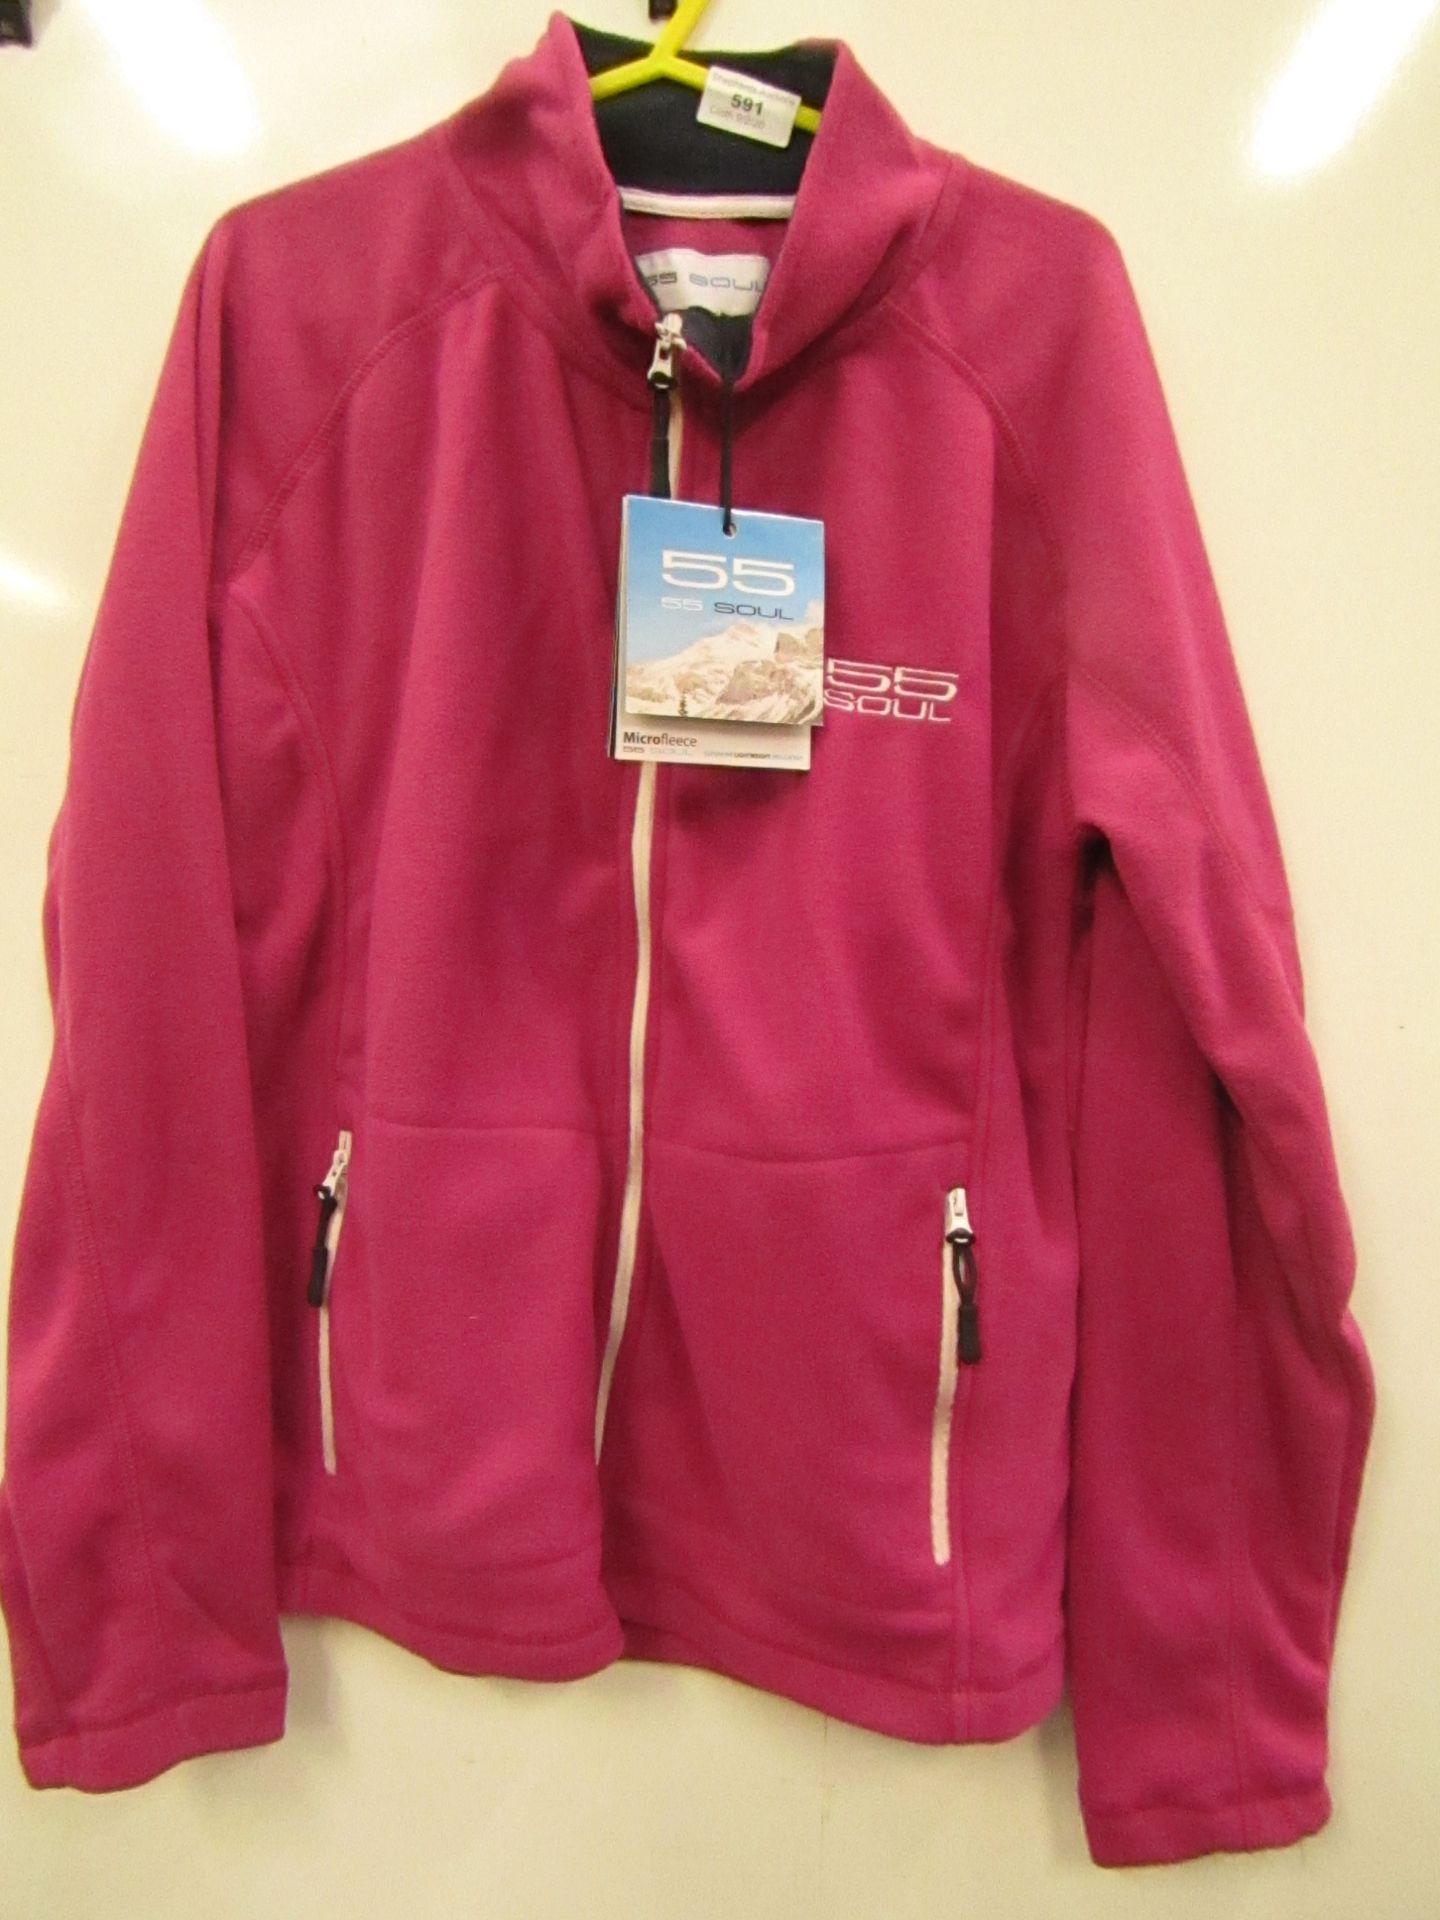 55 Soul Ladies 1/4 Zip Fleece size M new with tag